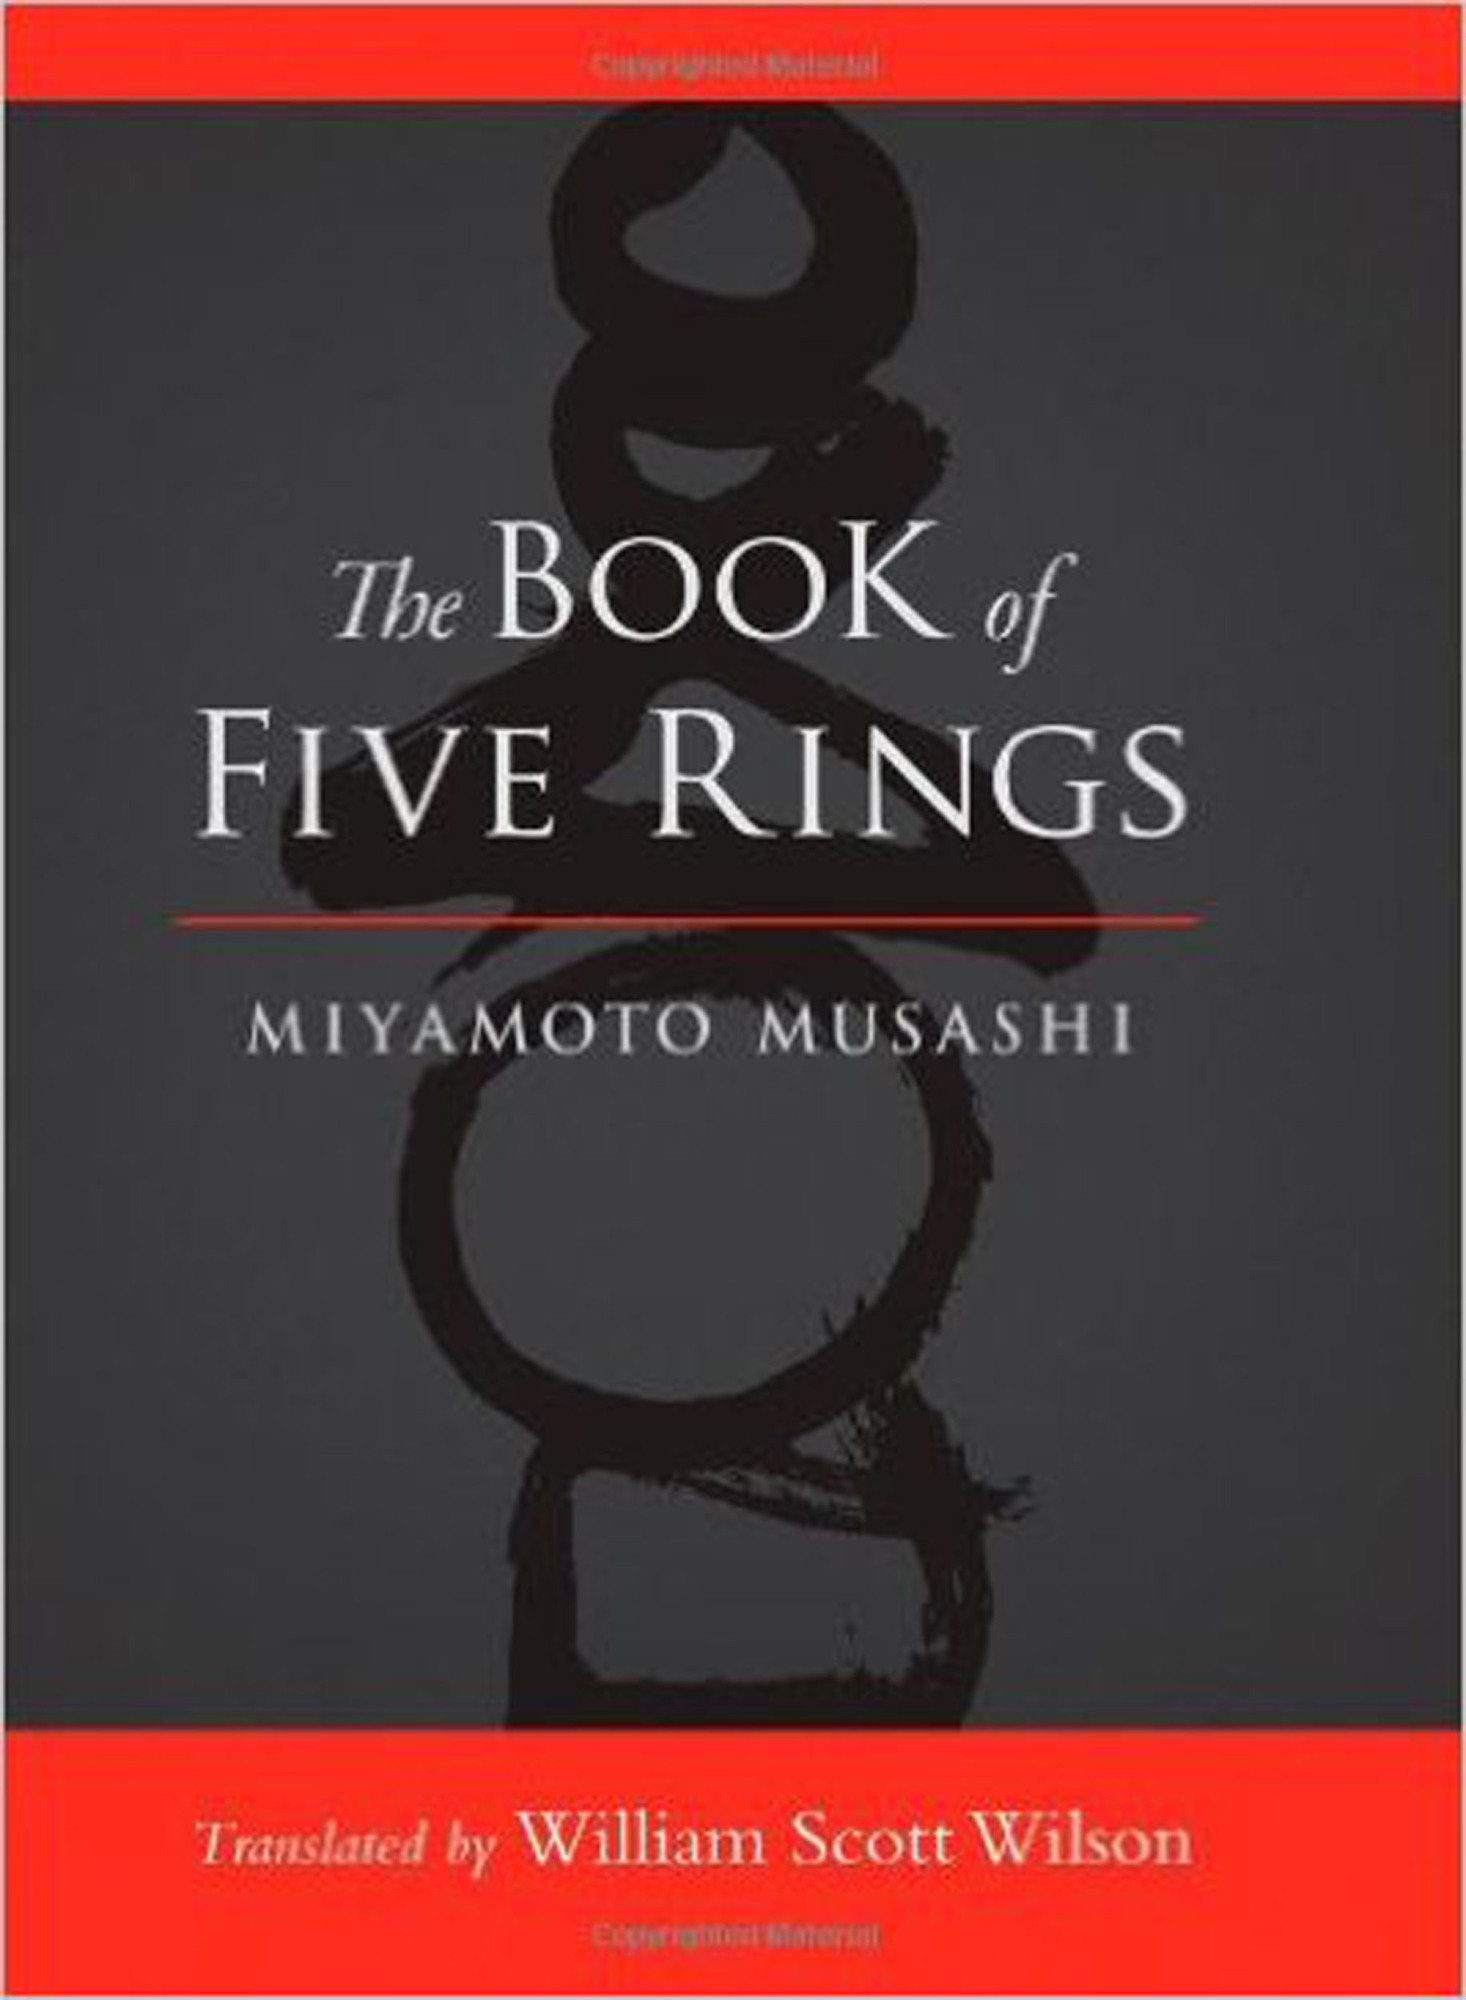 Why The Book of Five Rings is an essential read - Boing Boing